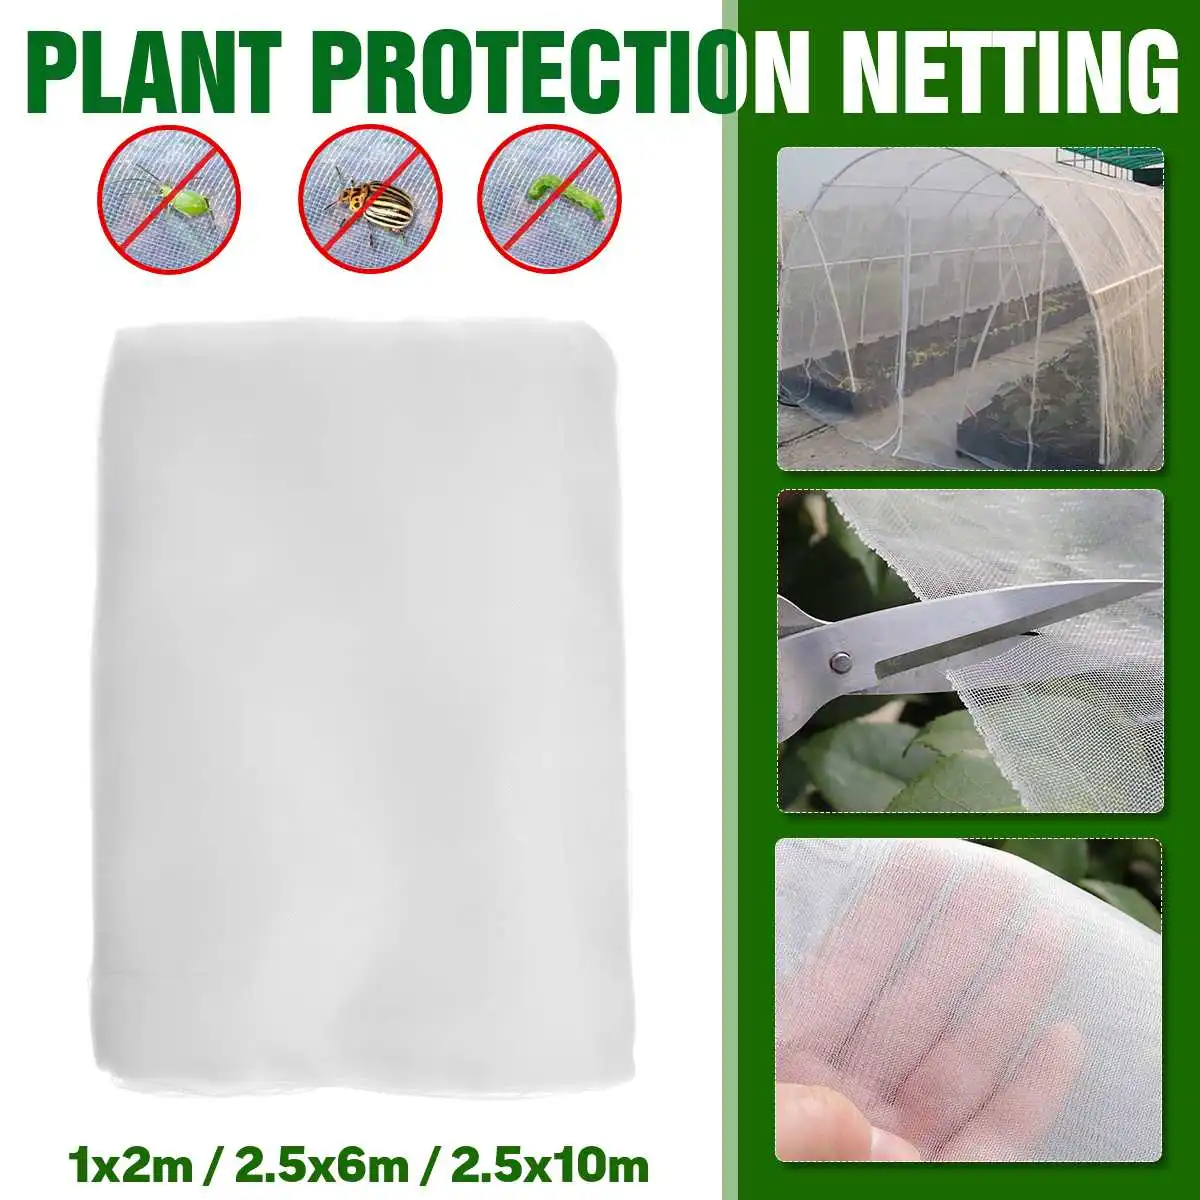 Insect Protection Net Bug Insect Bird Net Barrier Vegetables Fruits Flowers Plant Protection Greenhouse Garden Netting